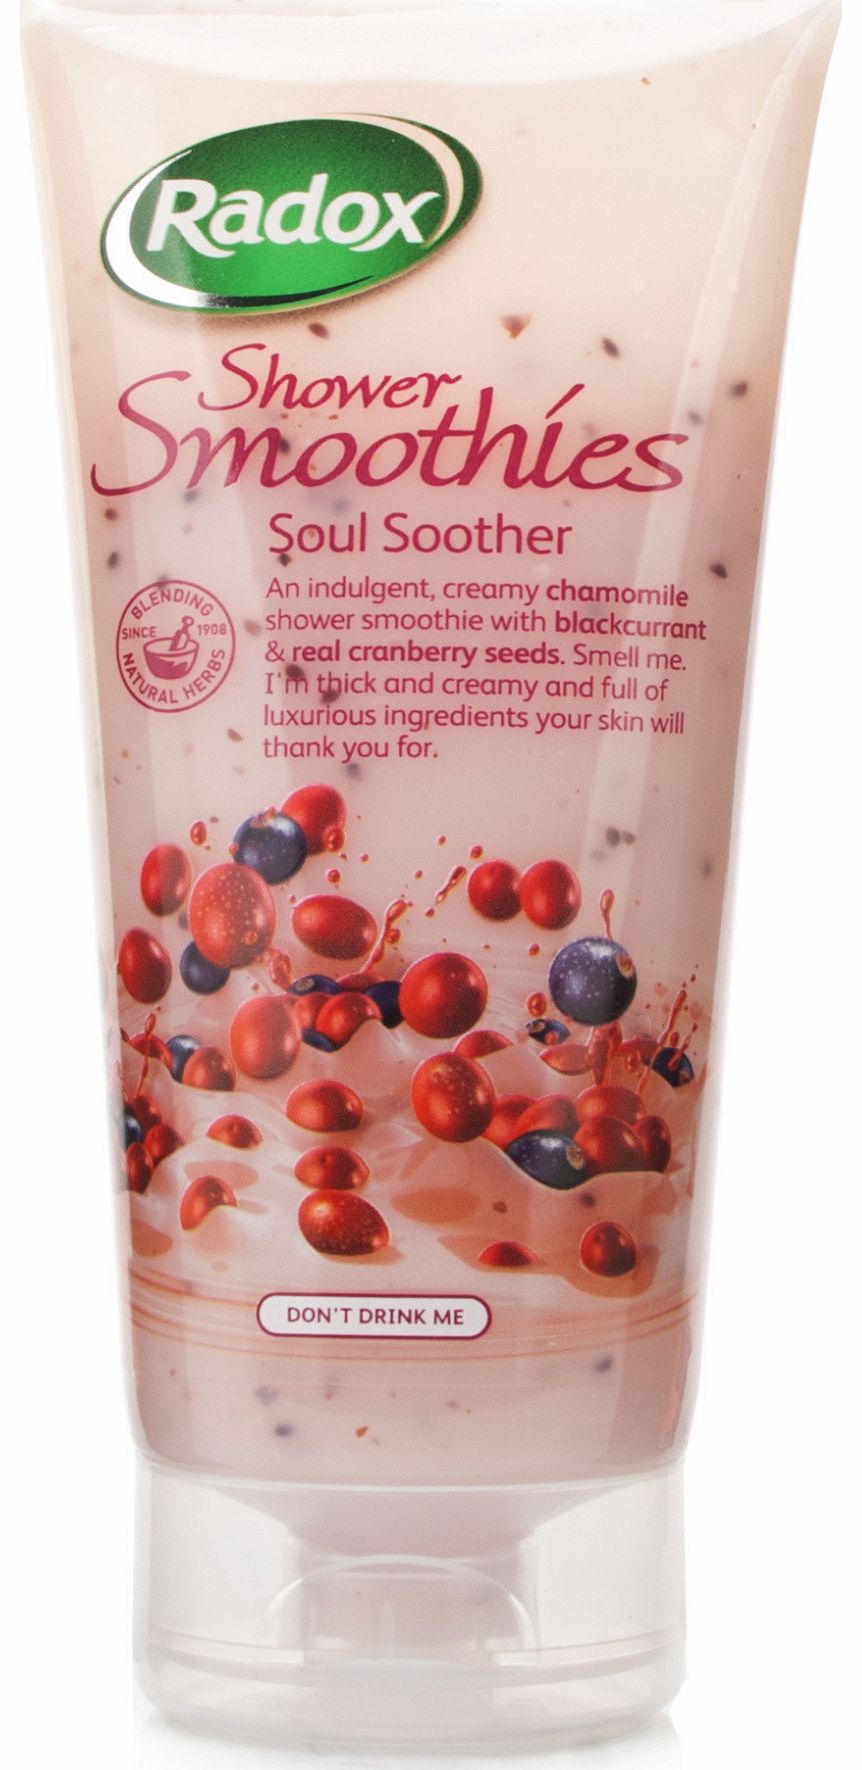 Radox Shower Smoothies Soul Soother